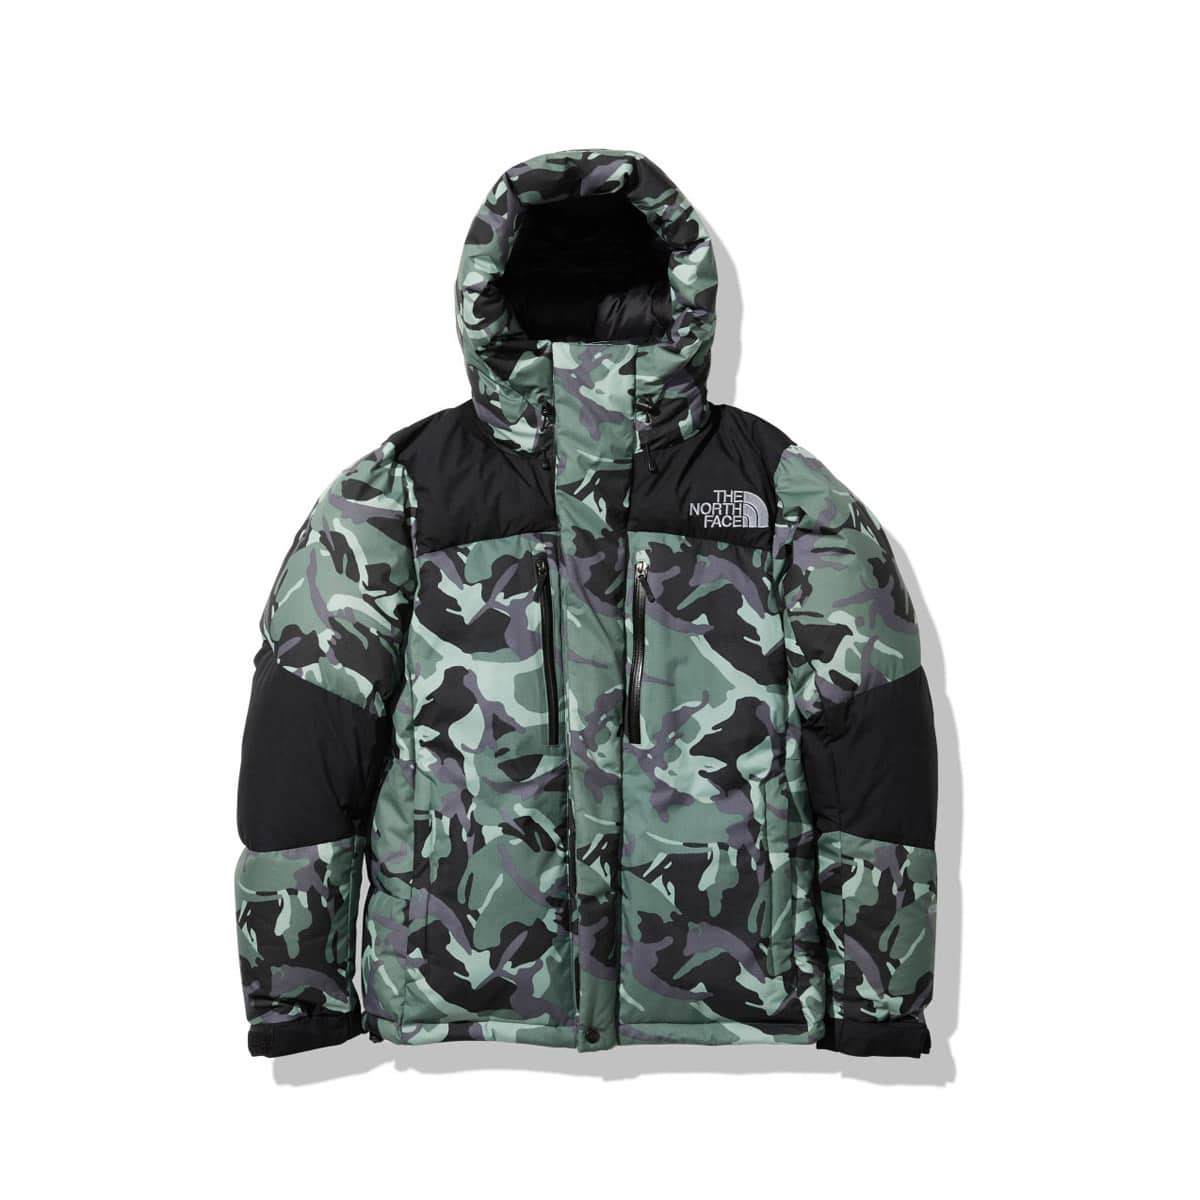 THE NORTH FACE NOVELTY BALTRO LIGHT JACKET ローレルリースグリーン 